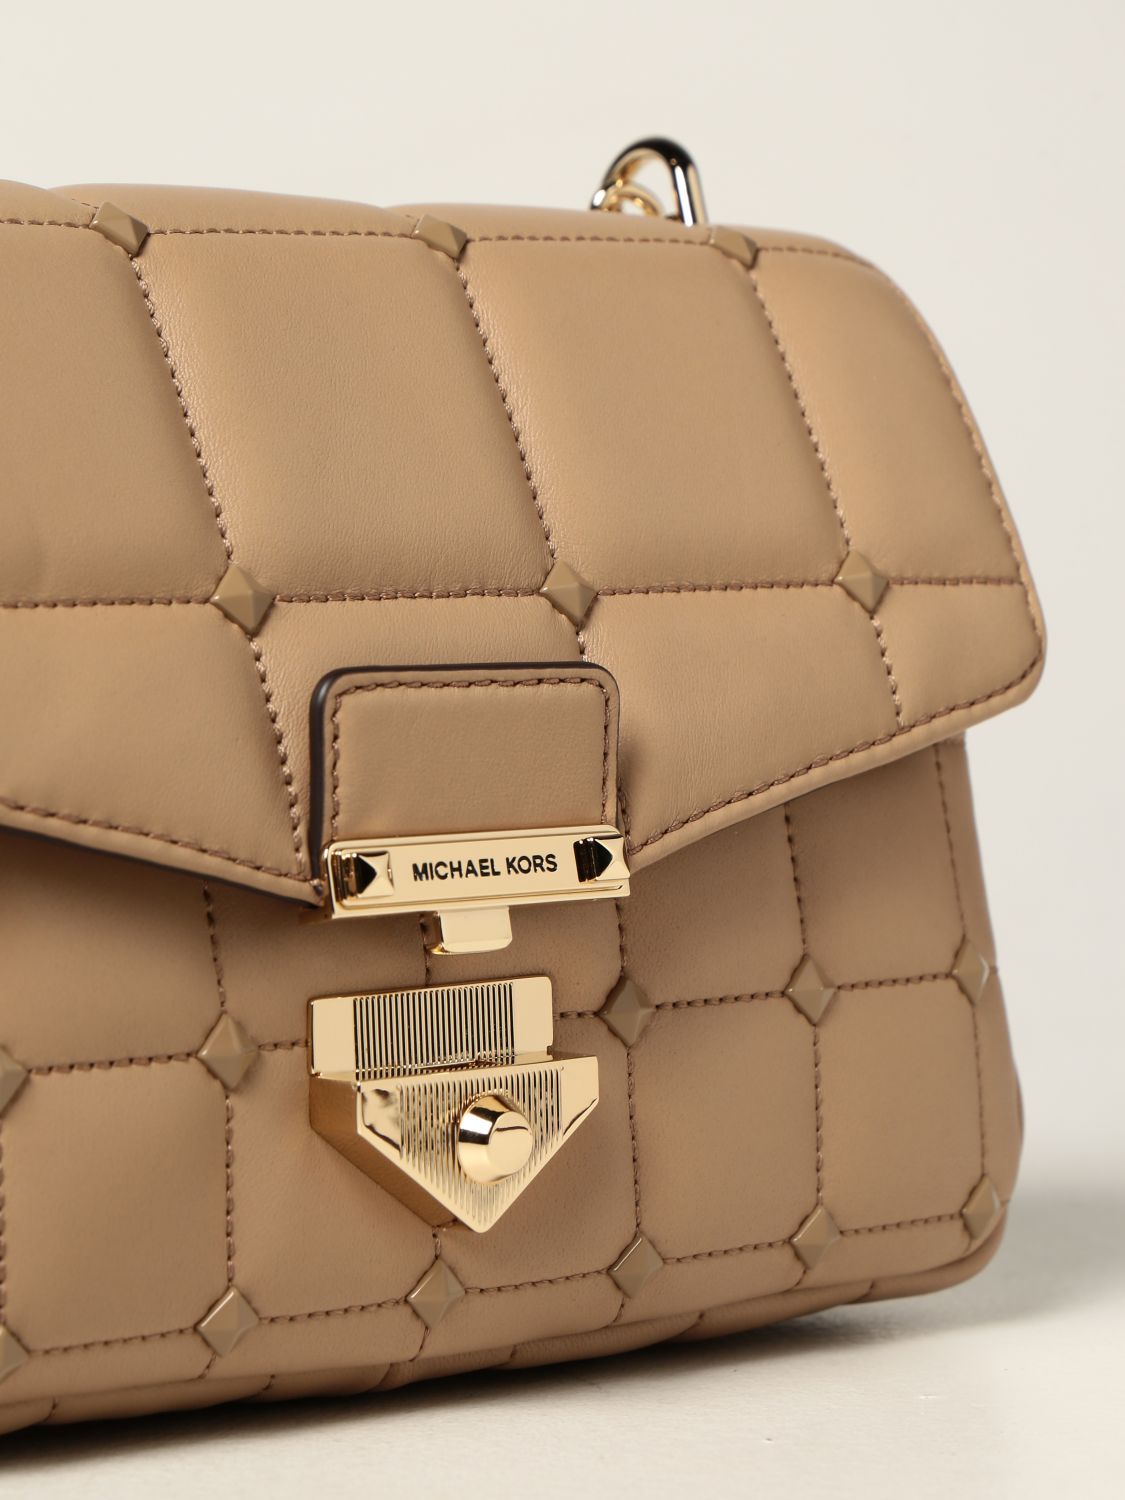 MICHAEL KORS Soho Michael bag in quilted leather Camel Crossbody